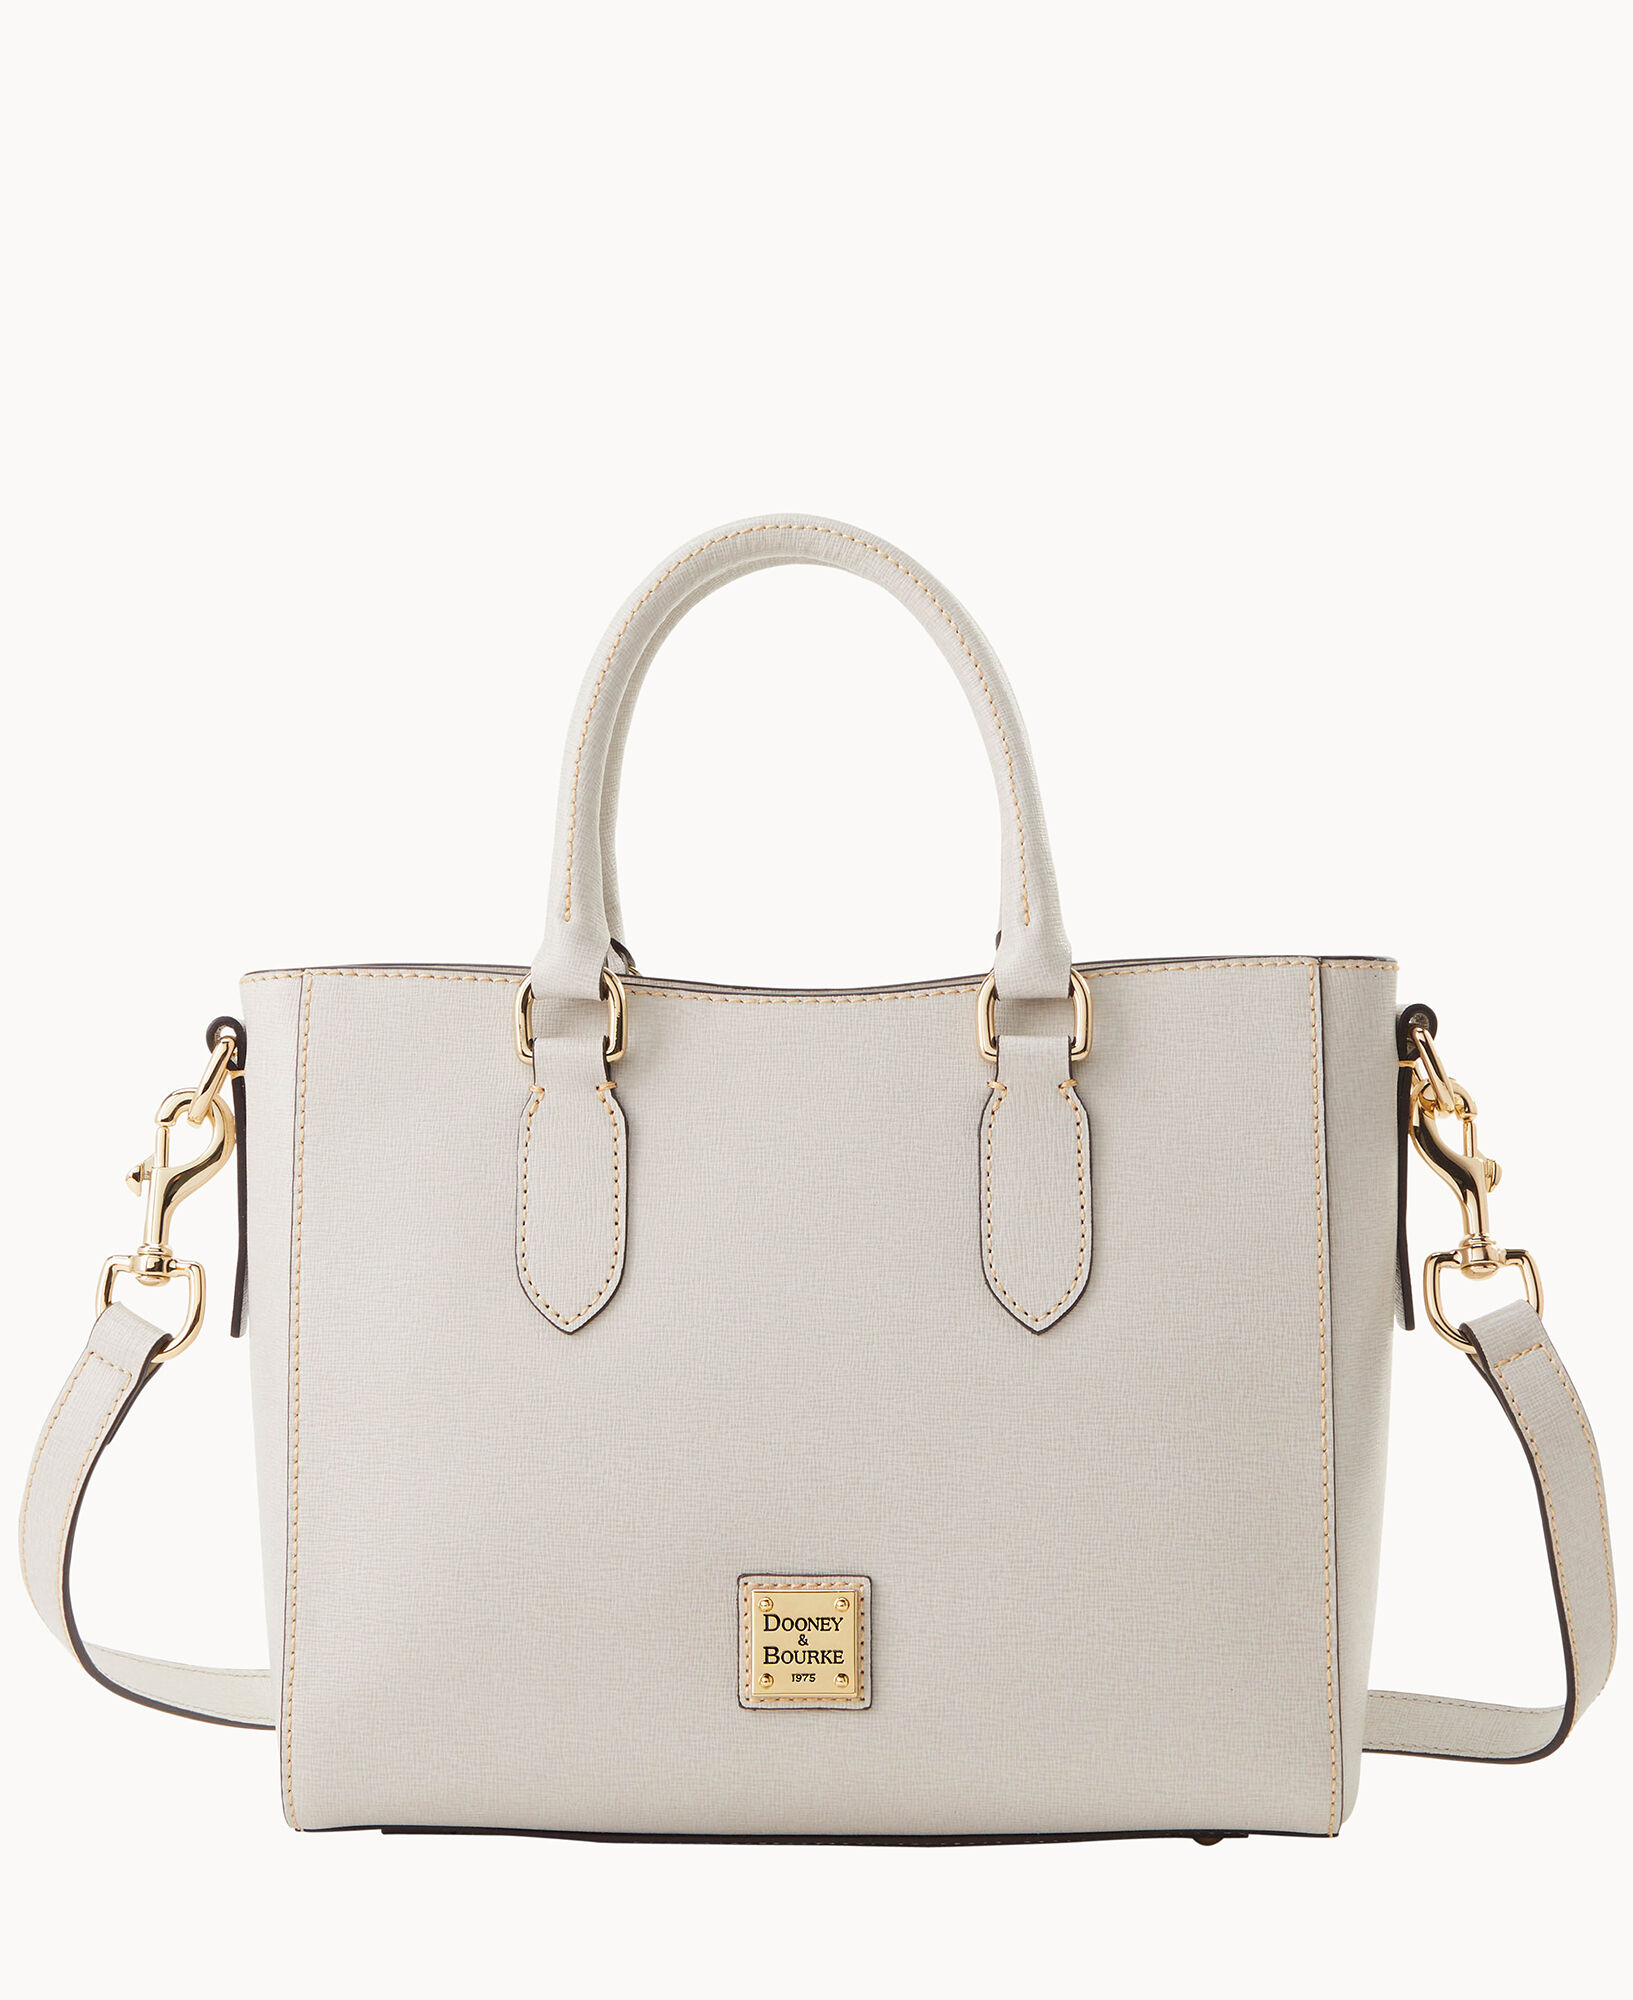 Dooney & Bourke Saffiano Leather Zip Satchel Off White Double Handled  Tote NWT